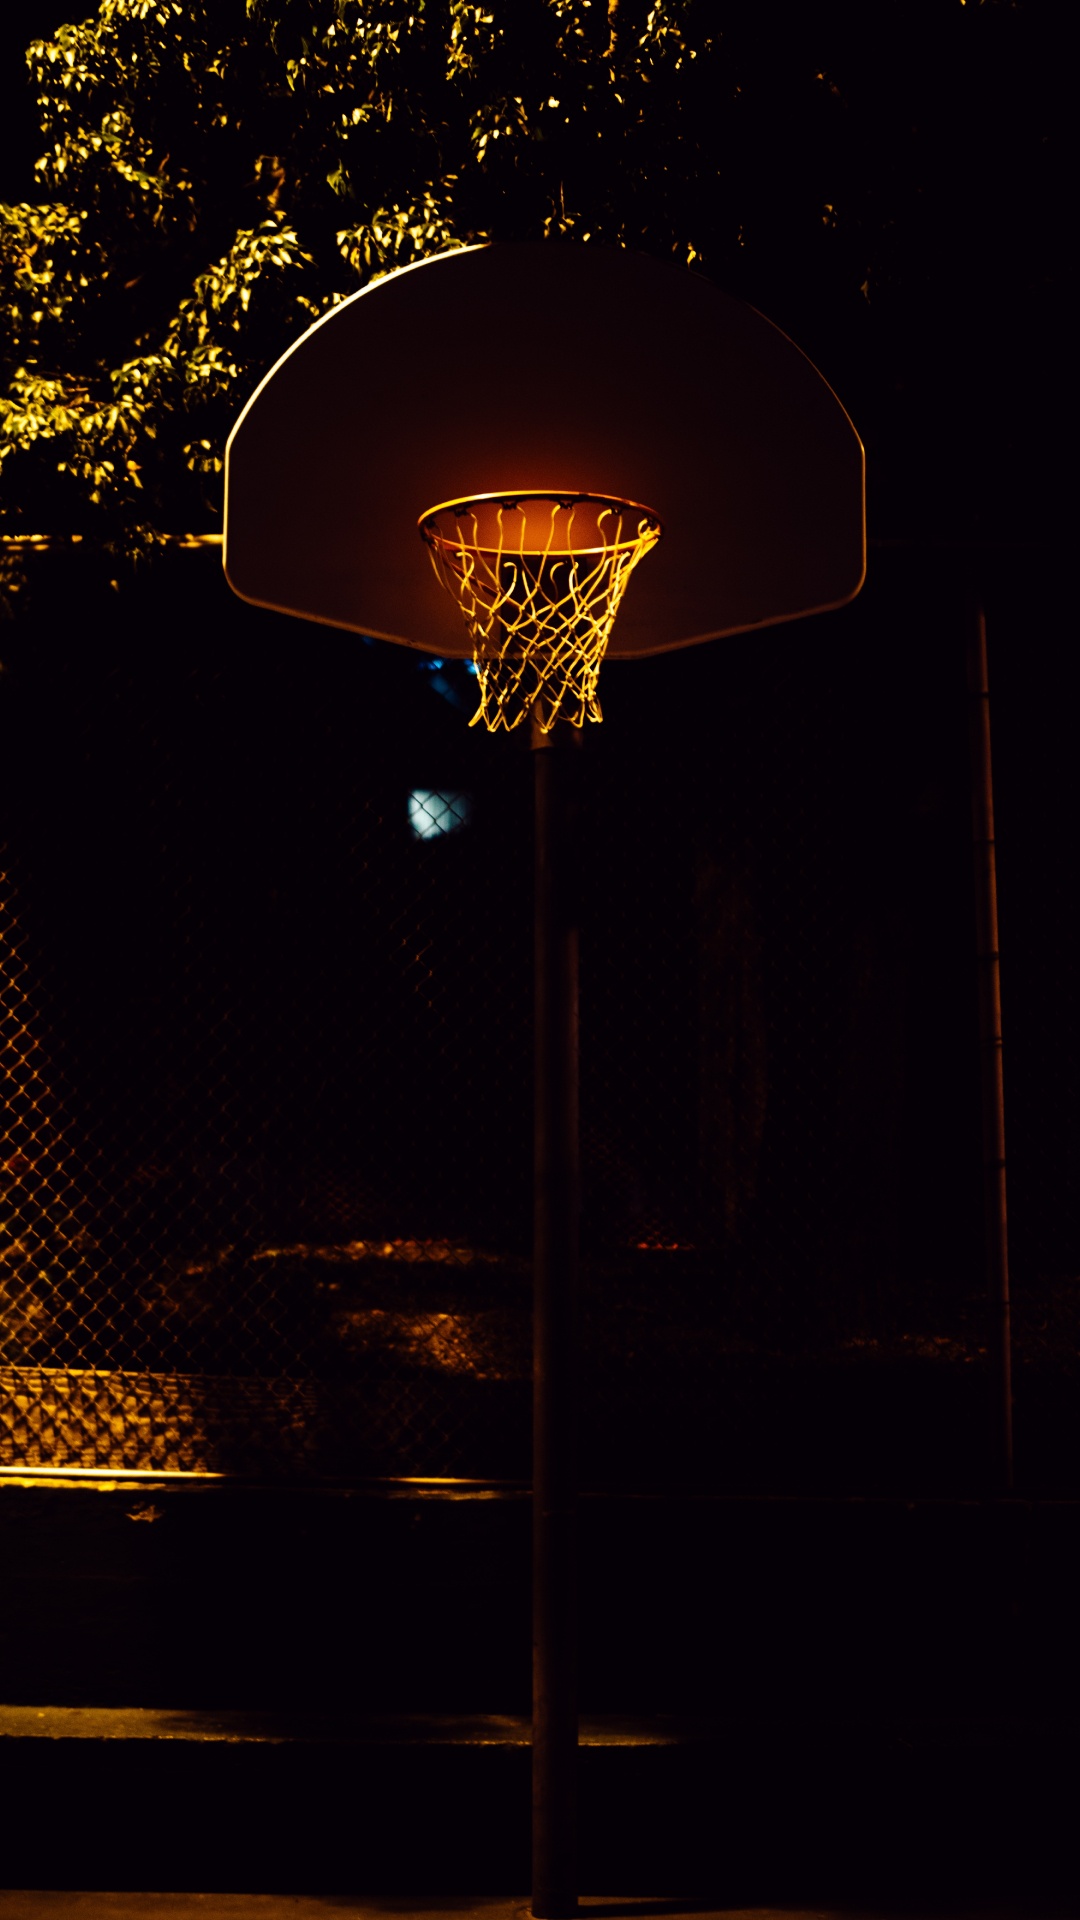 Basketball Hoop With Light Turned on During Night Time. Wallpaper in 1080x1920 Resolution